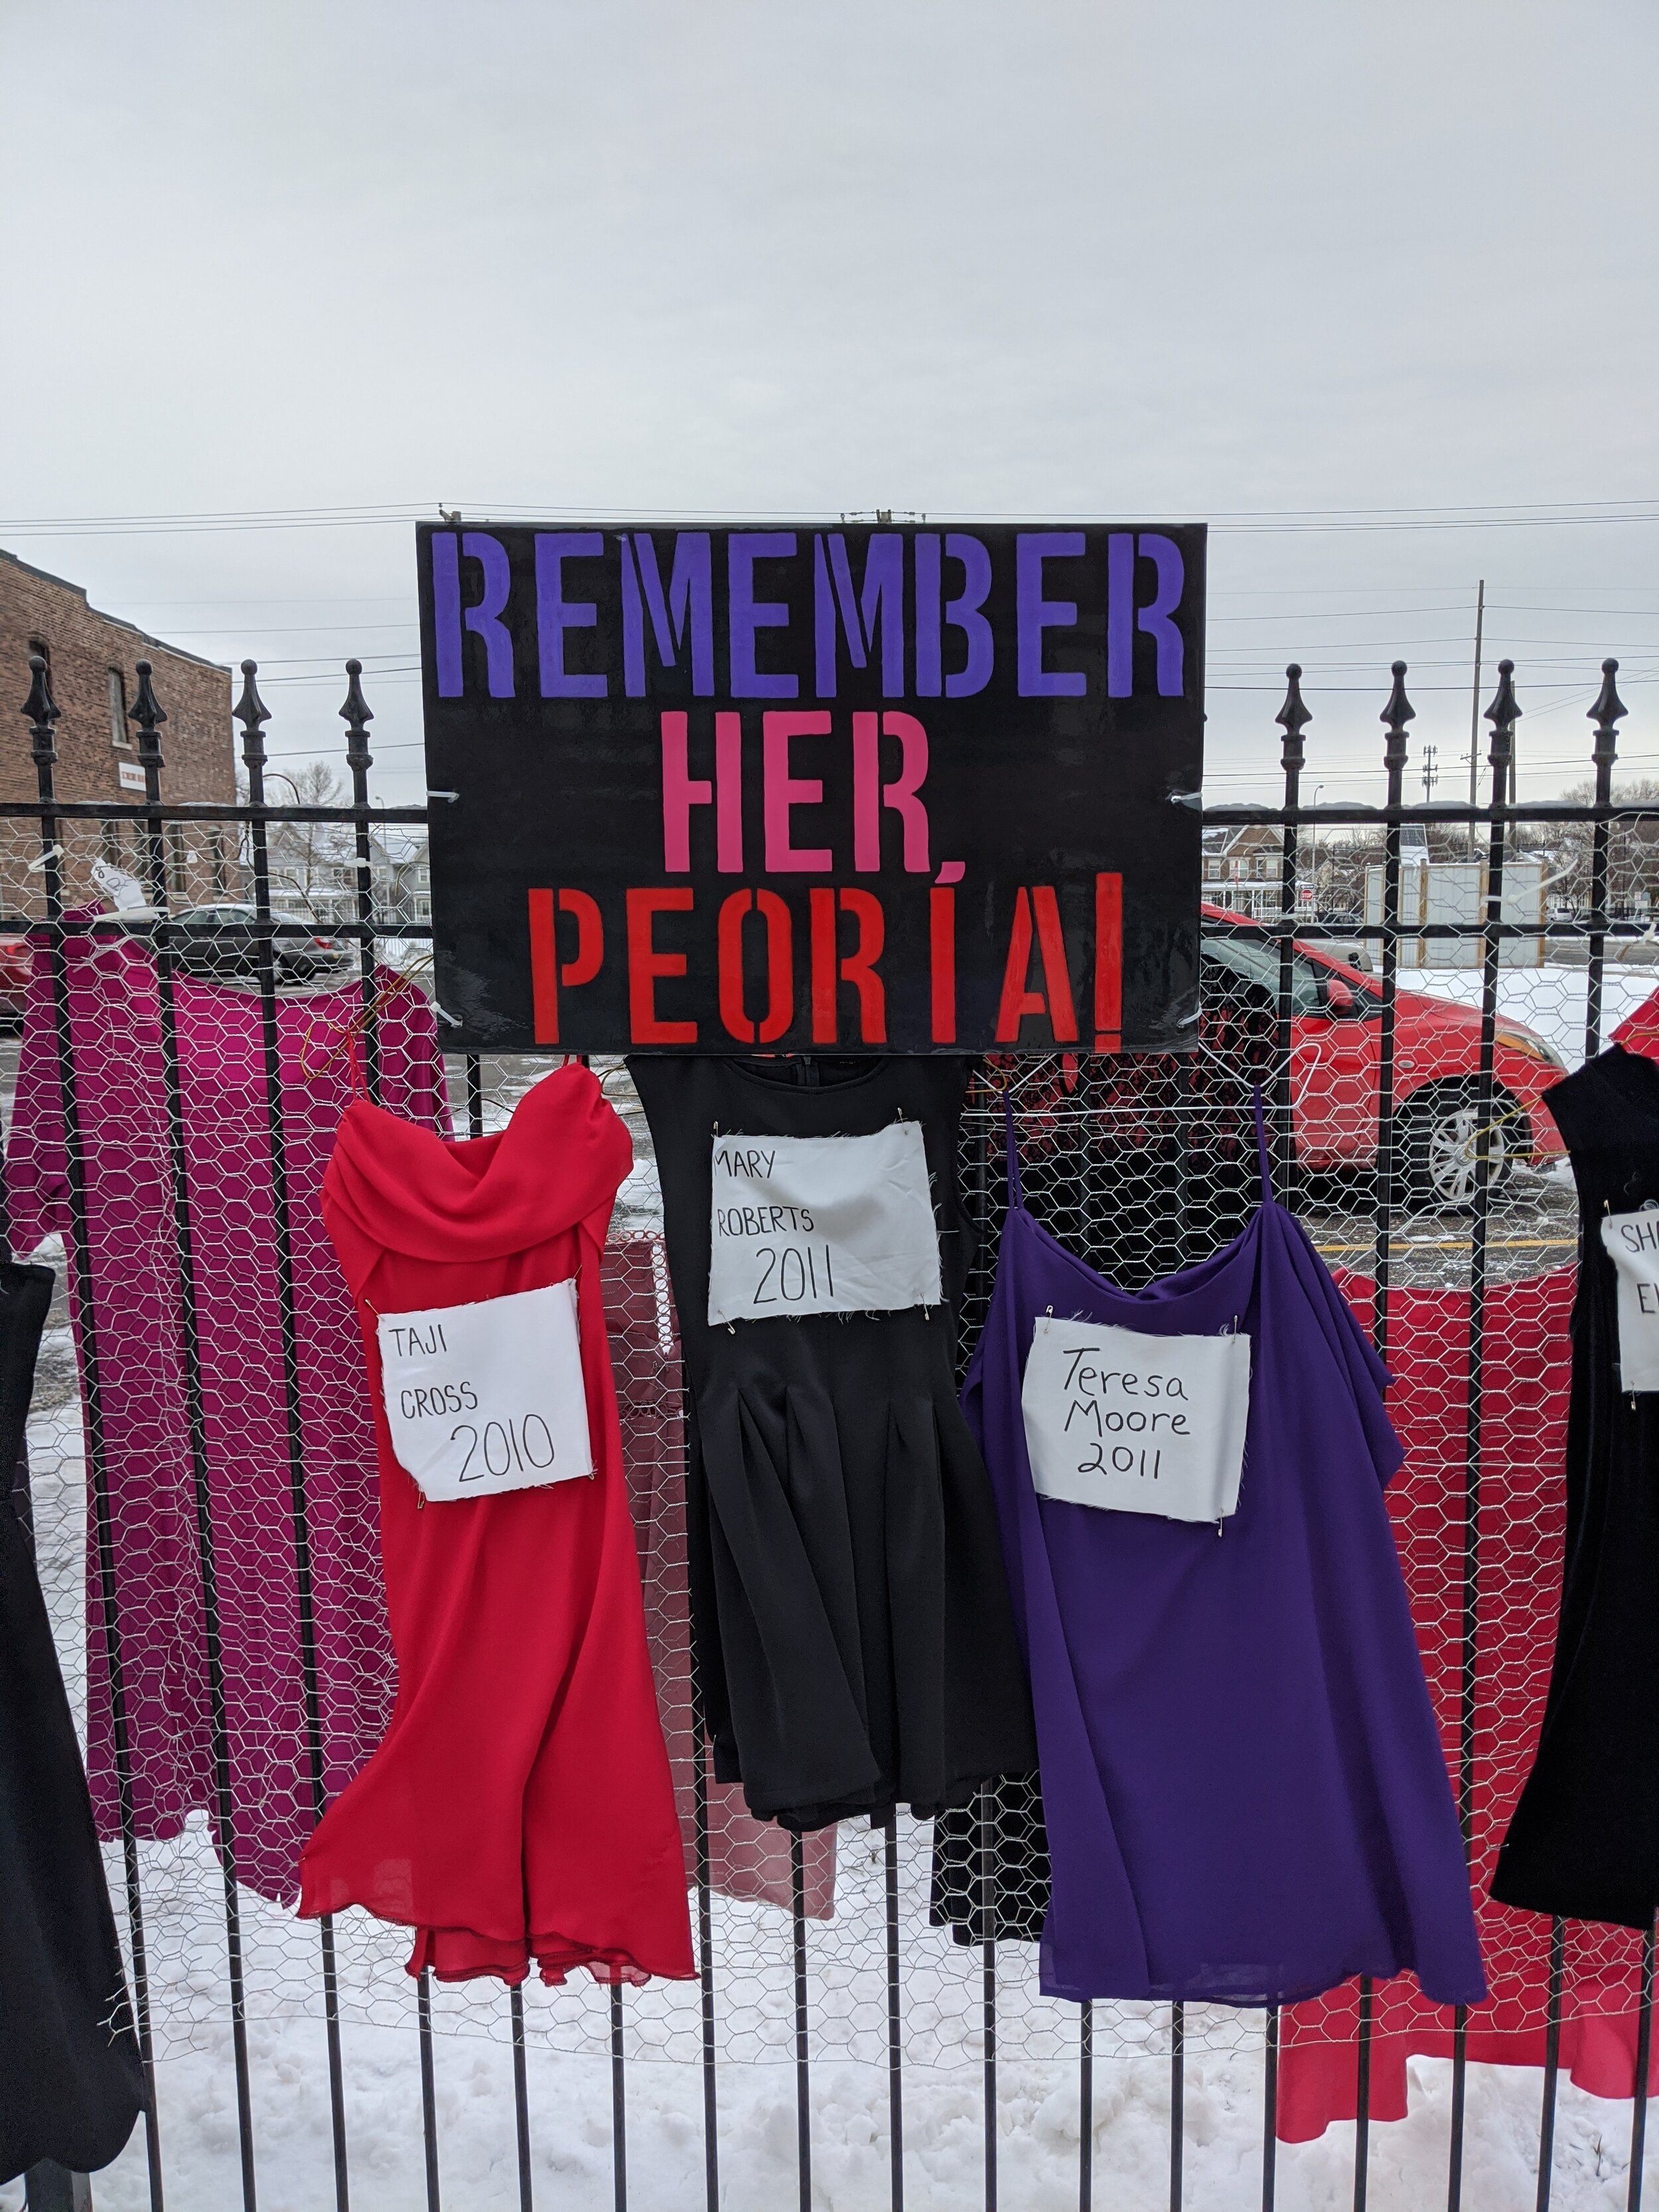   Remember Her, Peoria!   Collaborative Public Installation honoring the missing and murdered women of Peoria from 1993-2019  Dresses, fabric, fabric markers, hangers  2020   In collaboration with community leaders and activists:    Susan O’Neal    N